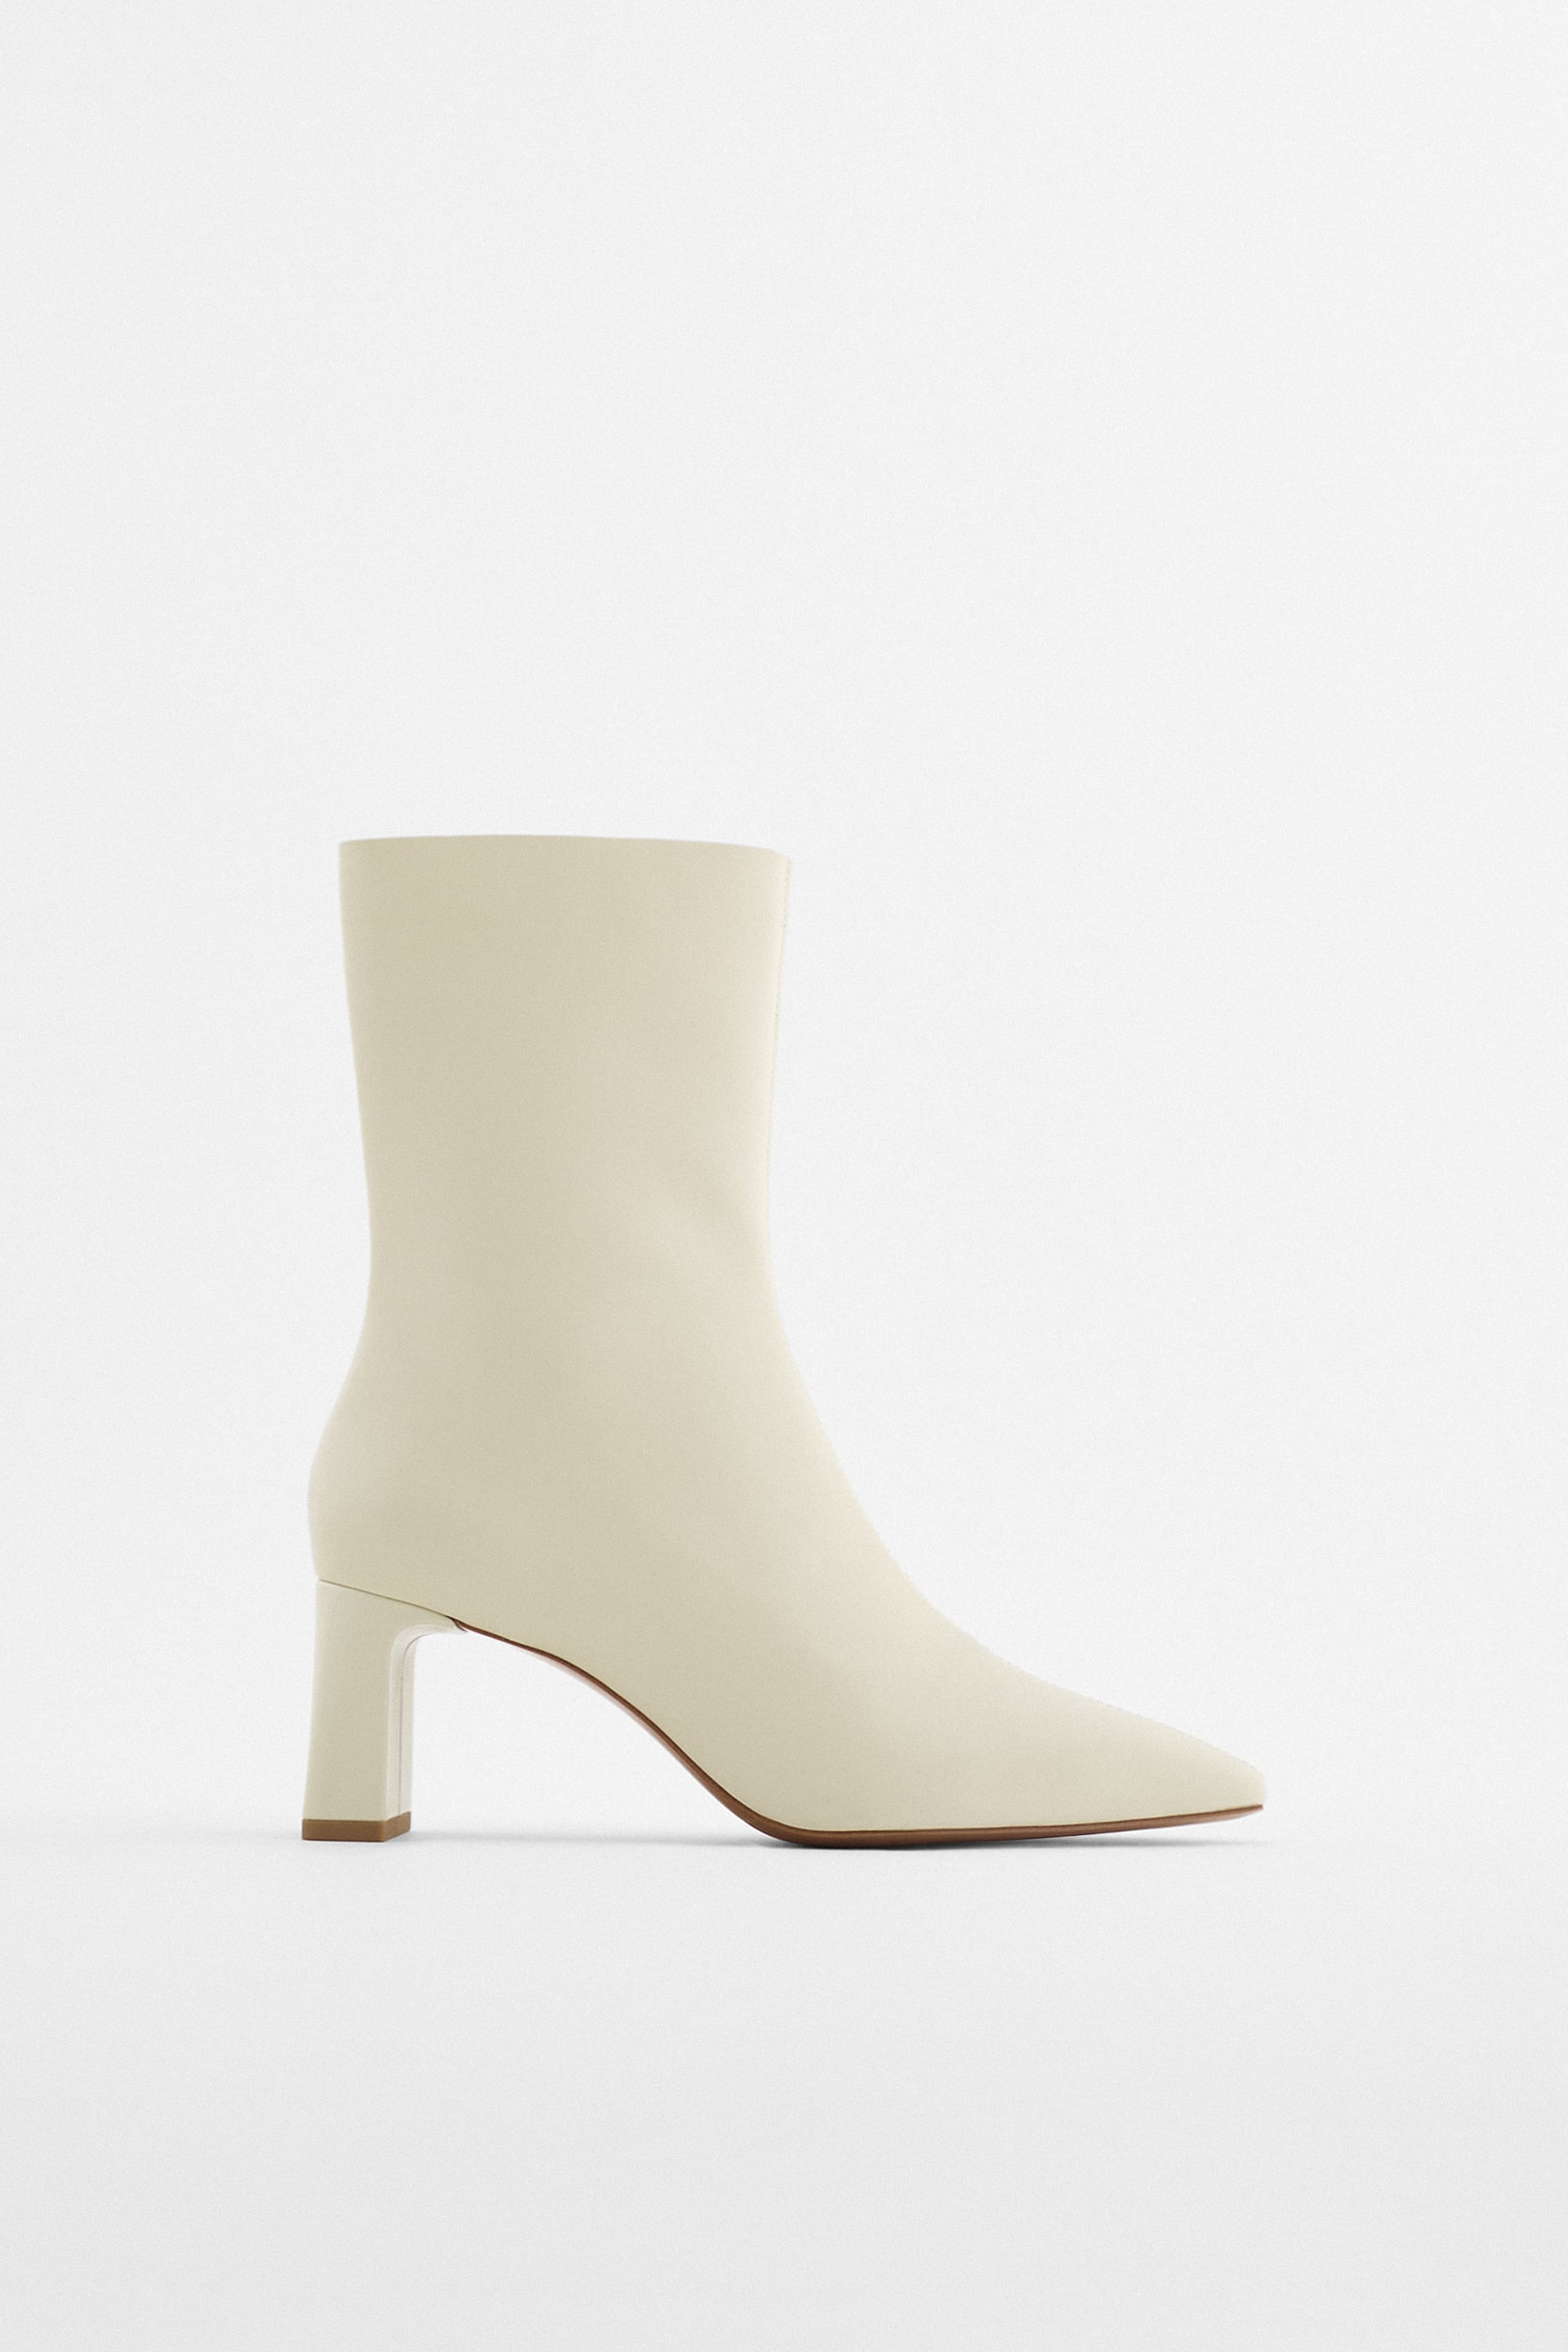 The 30 Best Winter Boots at Zara | Who What Wear